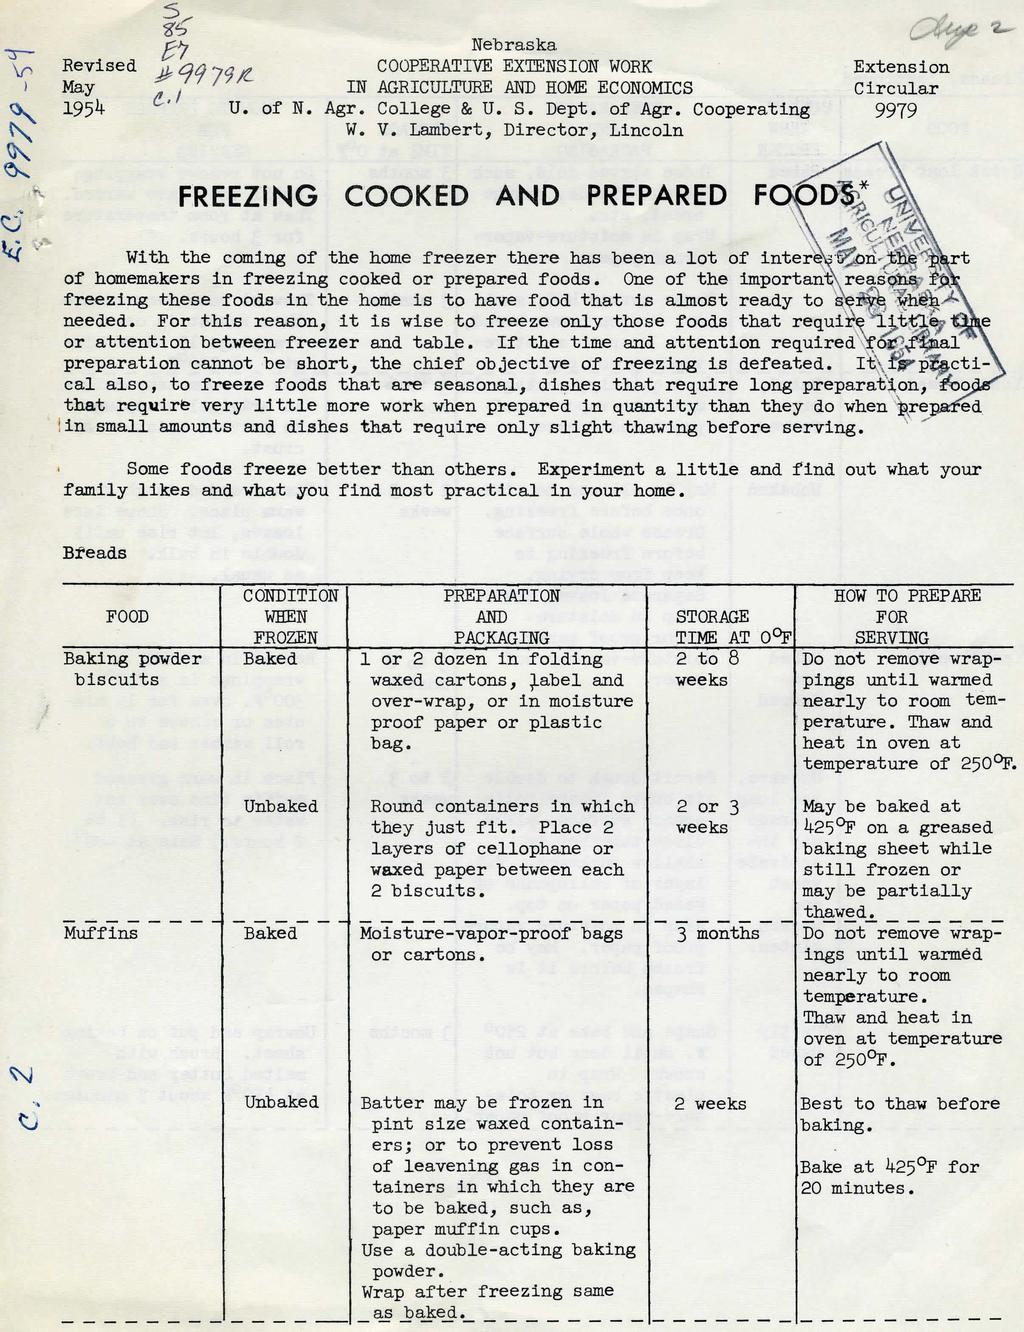 Revised May 1954 U. of N. Nebraska. COOPERATIVE EXTENSION WORK IN AGRICULTURE HOME ECONOMICS Agr. College & U. S. Dept. of Agr. Cooperating W. V. Lambert, Director, Lincoln Extension Circular 9979 F.